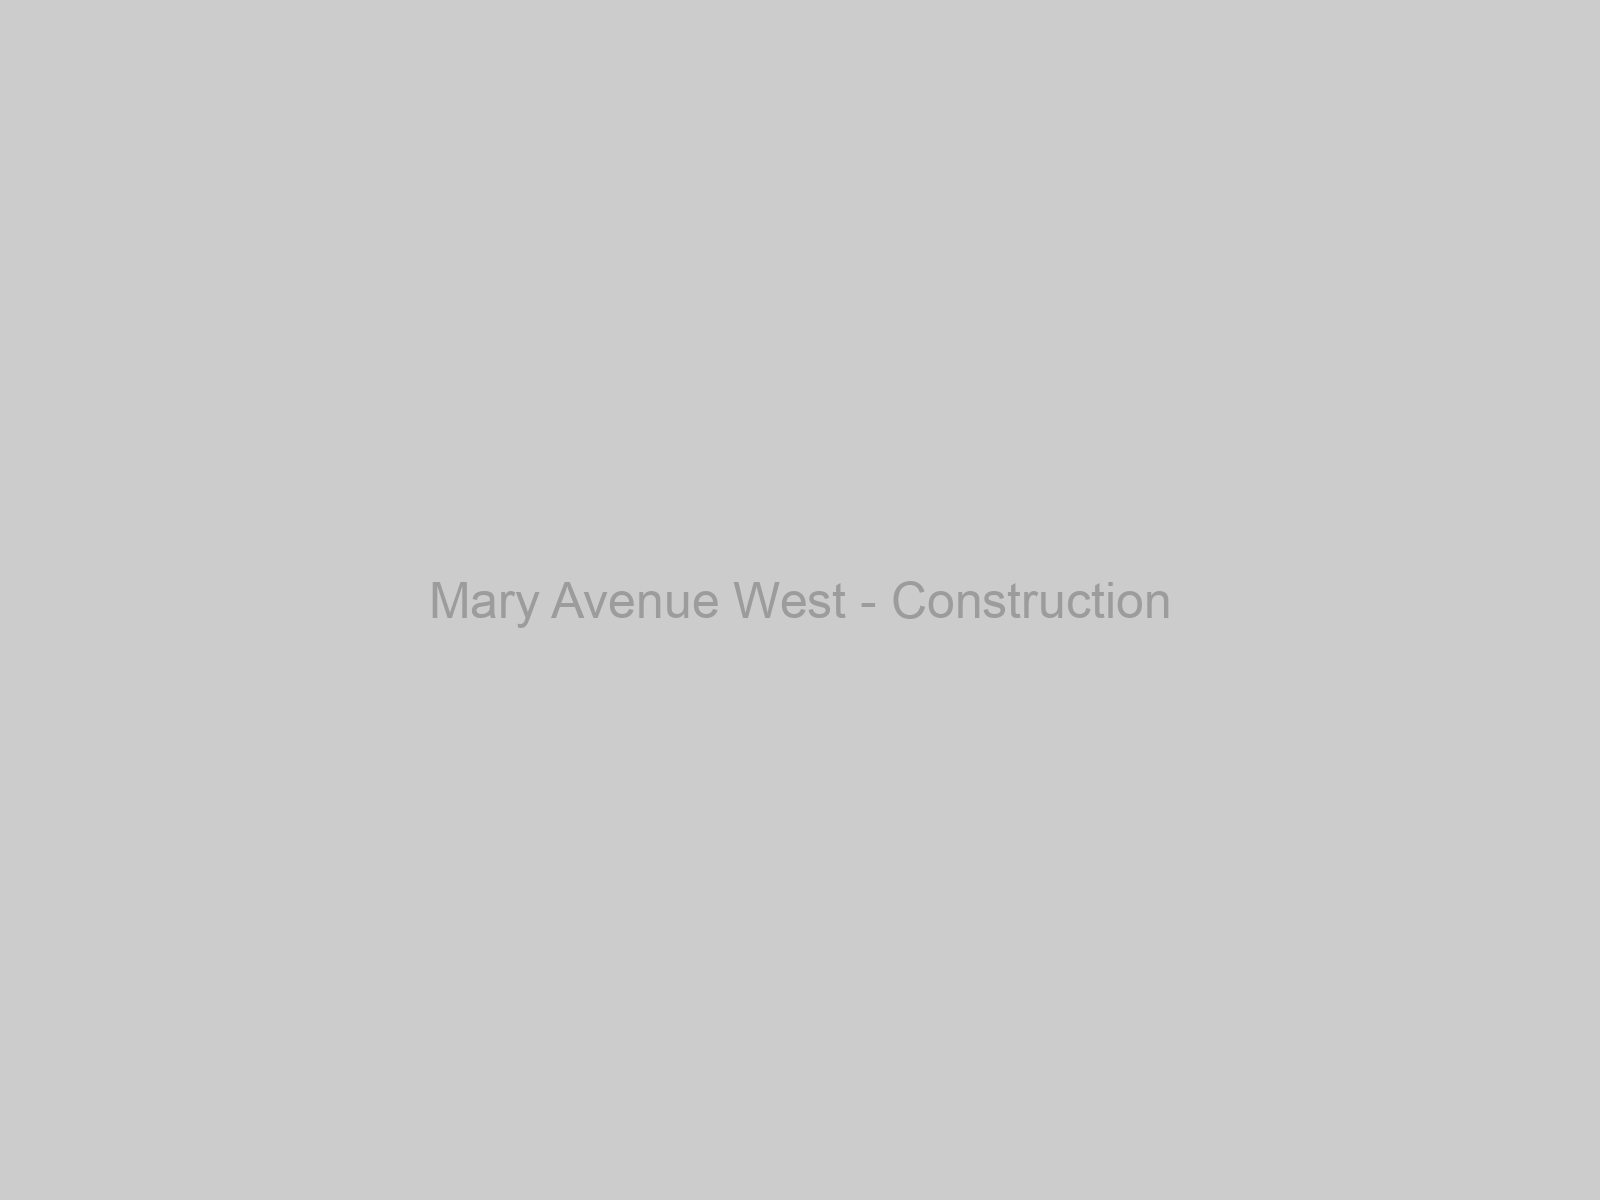 Mary Avenue West - Construction